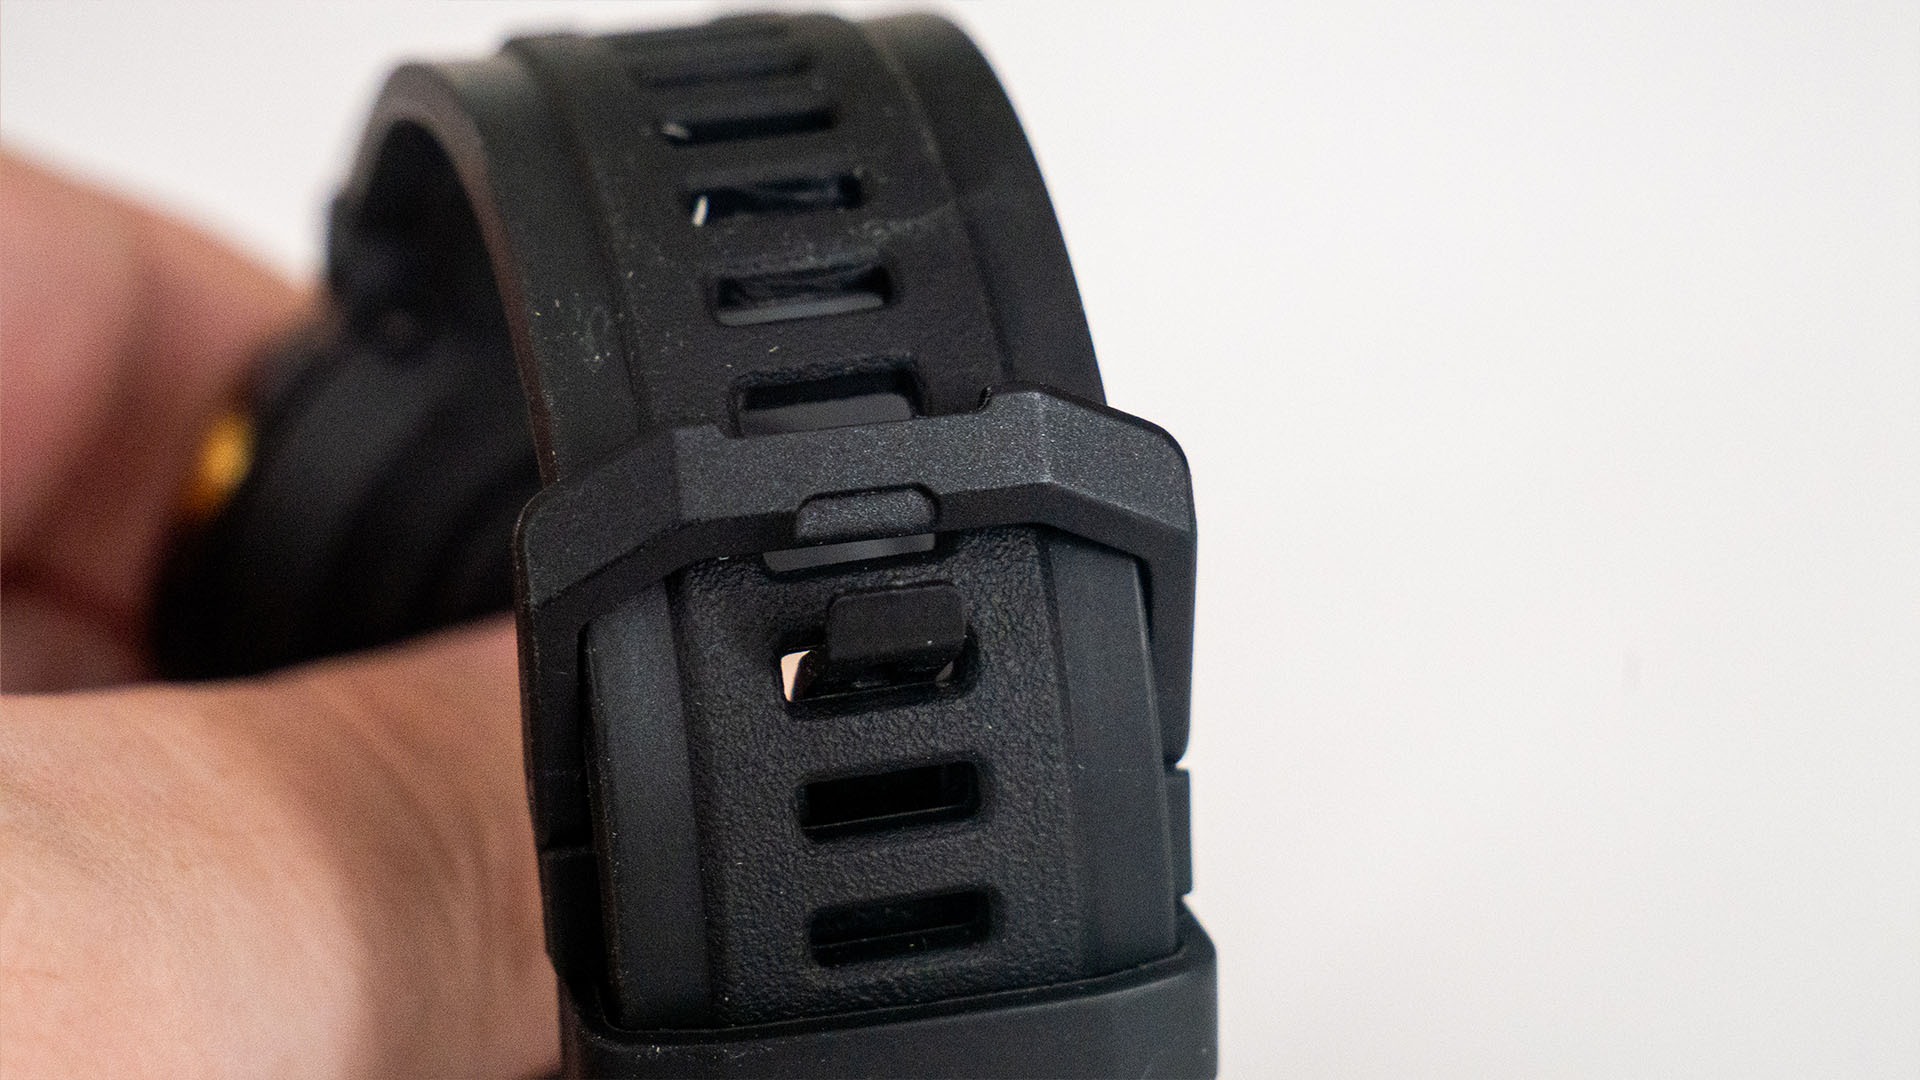 Image of strap of T-Rex 2 watches from Amazfit